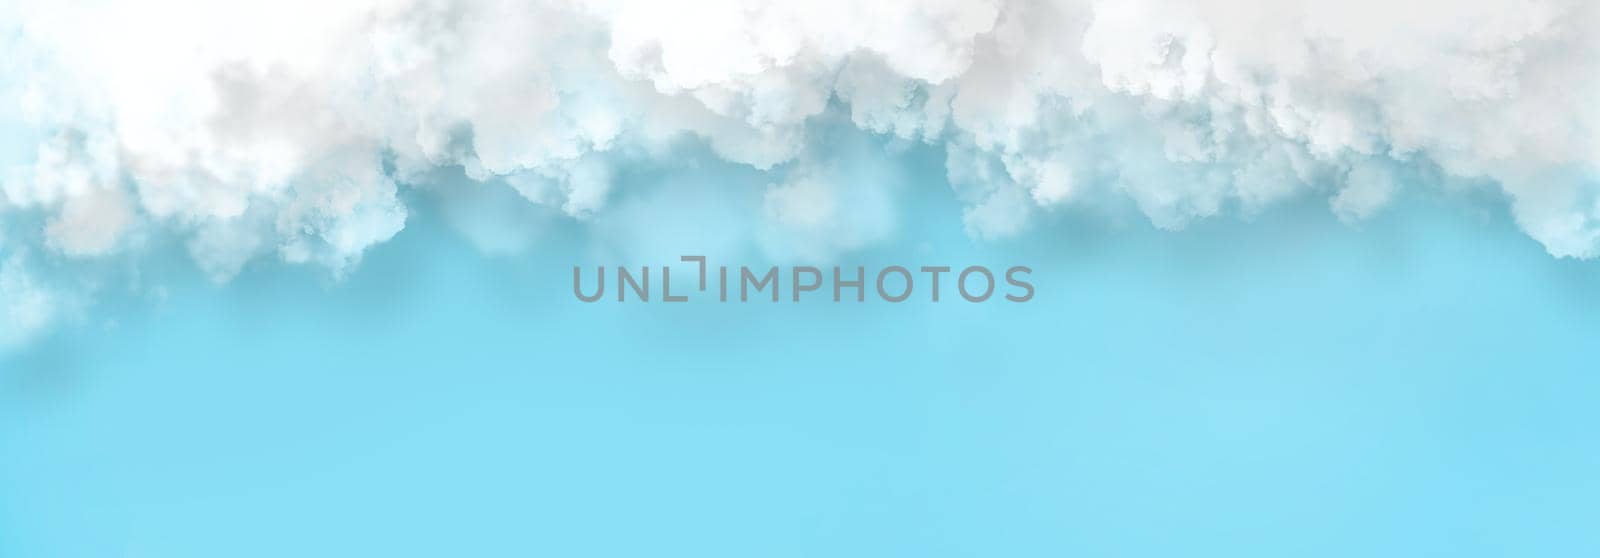 Clouds on blue sky with copy space banner background, Clouds illastration